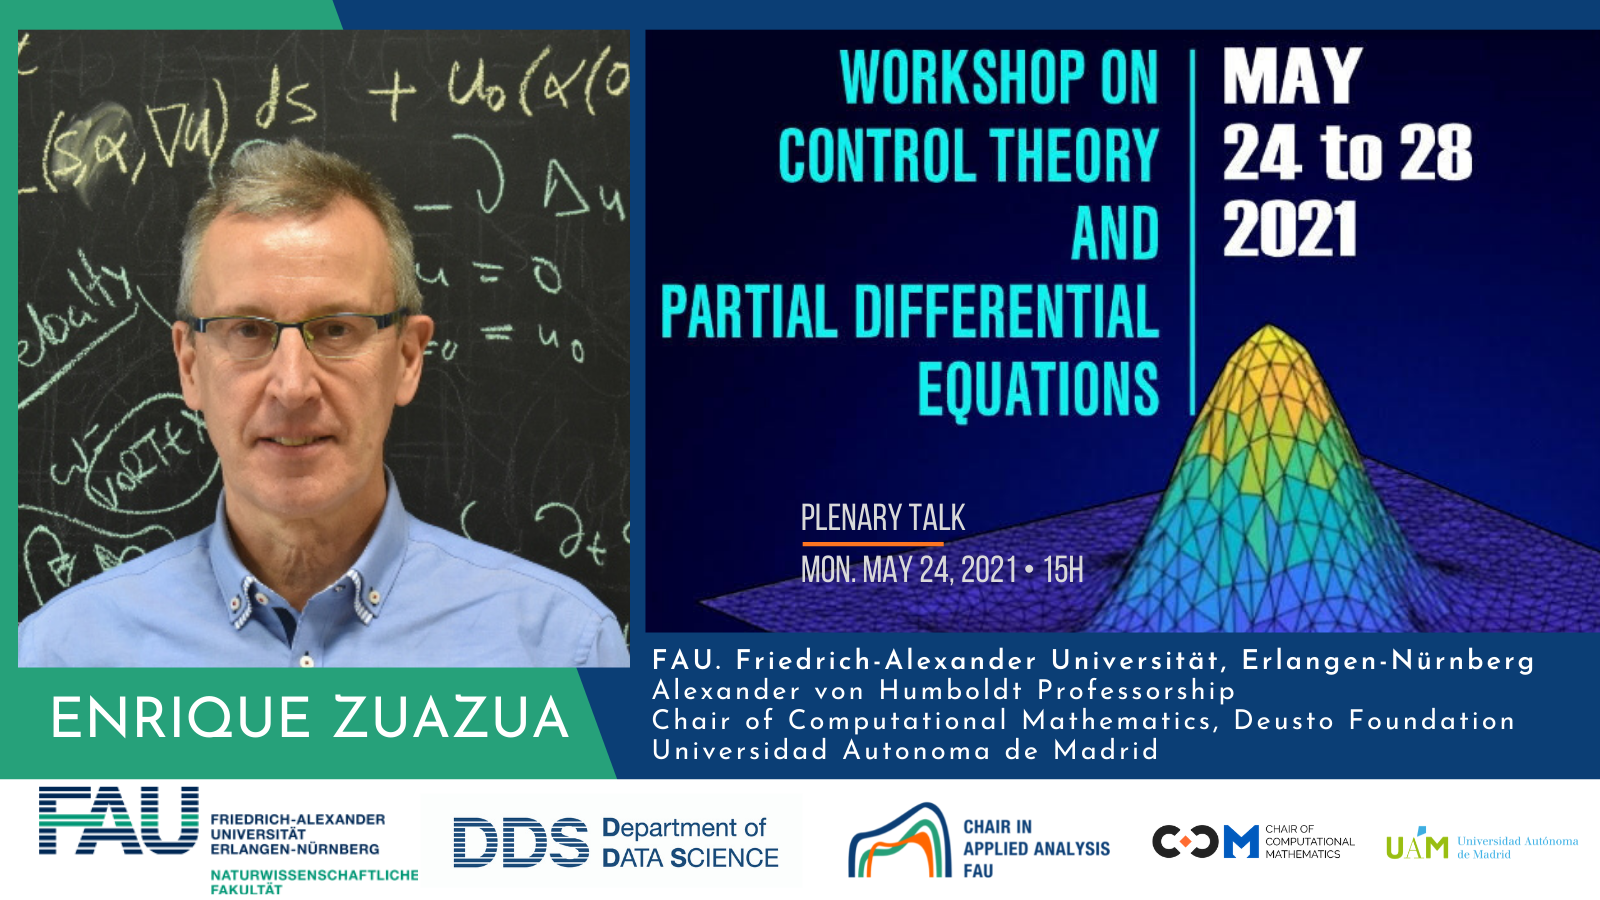 Workshop on Control Theory and Partial Differential Equations